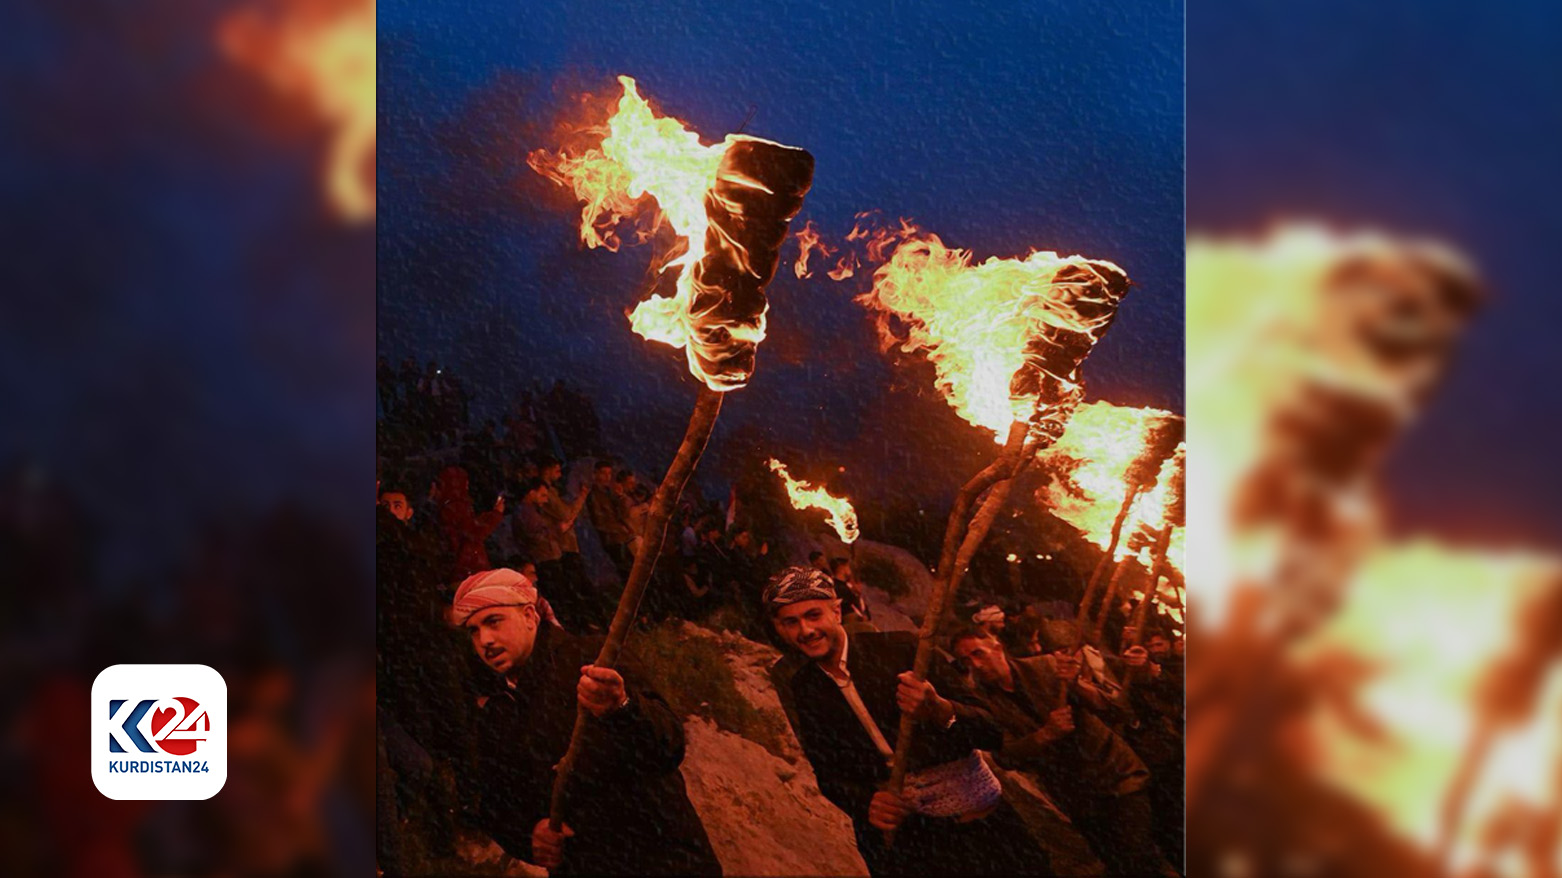 People carrying fire torches during the Newroz celebration. (Photo: Kurdistan24)